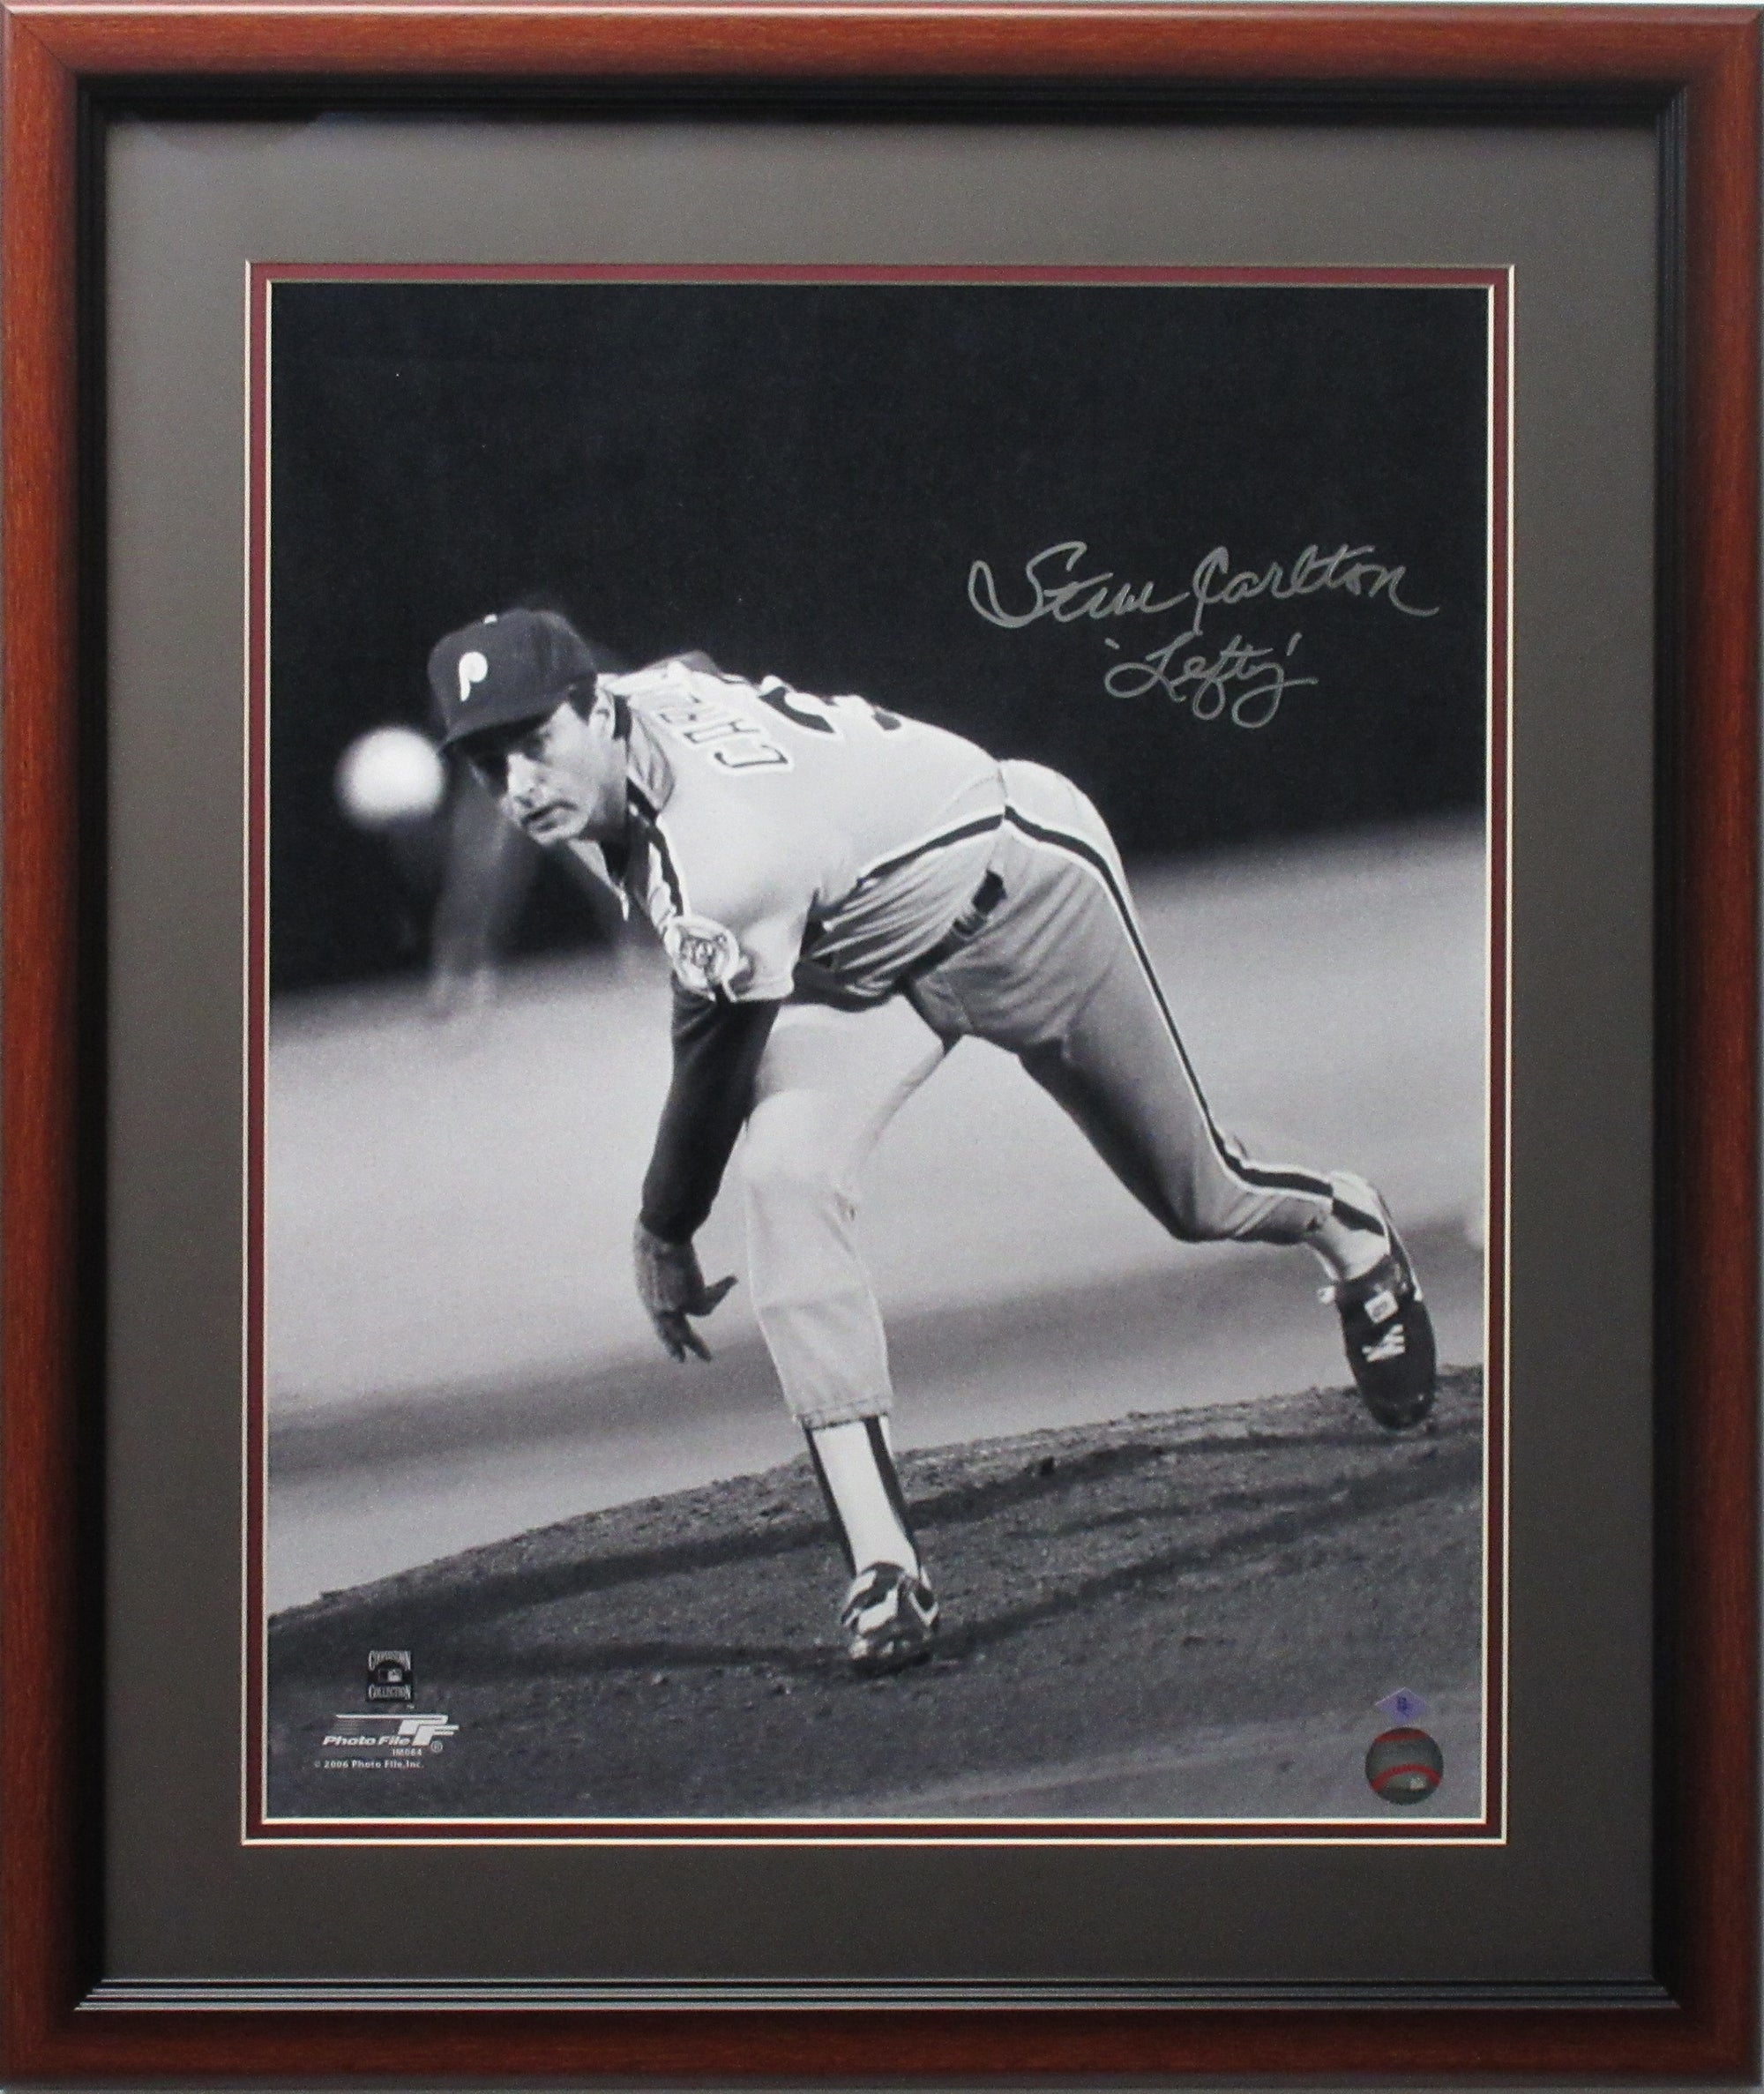 Steve Carlton Autographed and Framed Blue Phillies Jersey